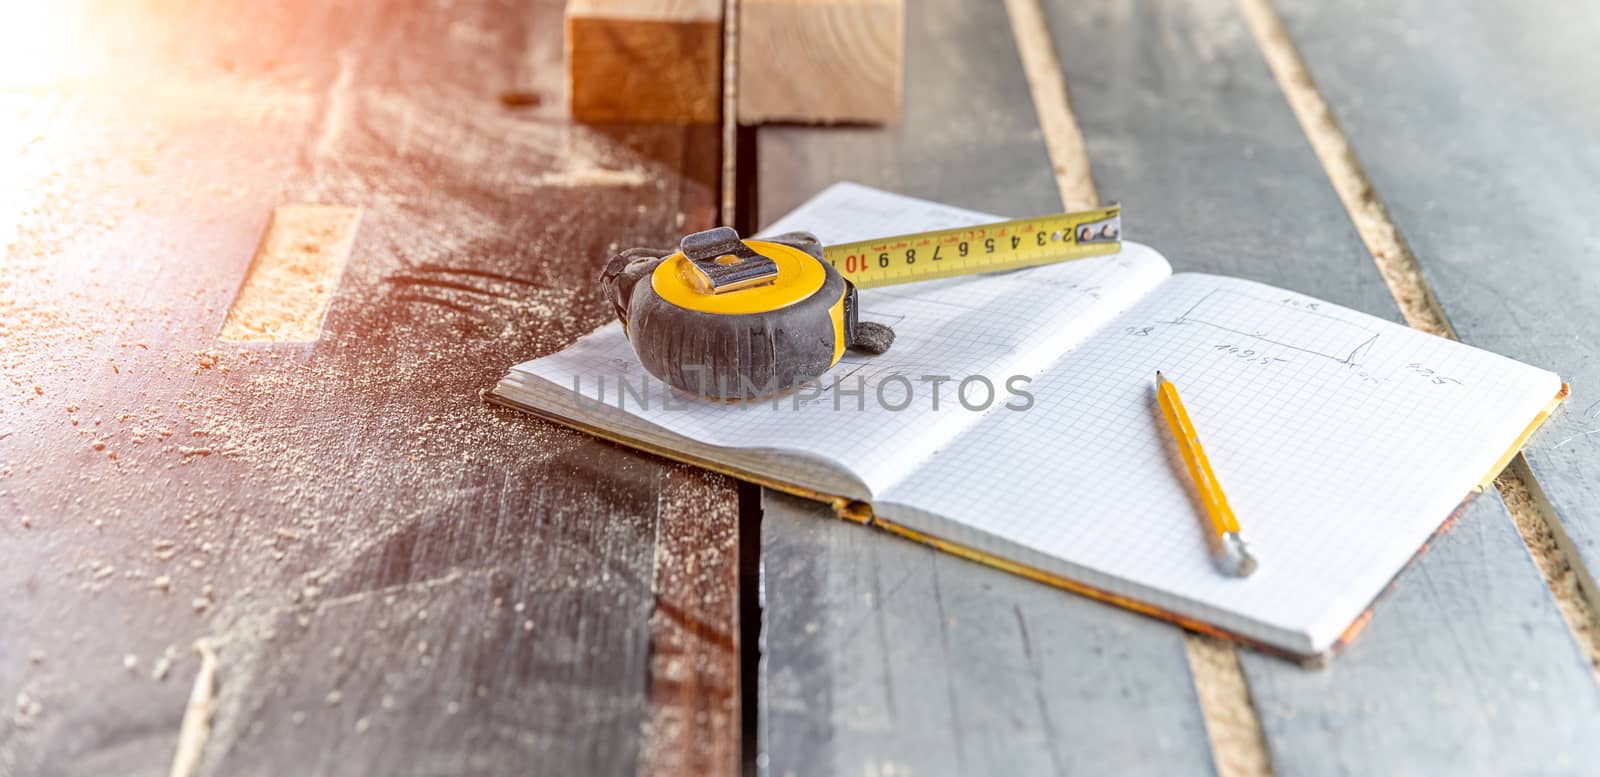 draw prepared wood products in a workbook in a joinery. tape measure, pencil and notebook on the table with chainsaw by Edophoto